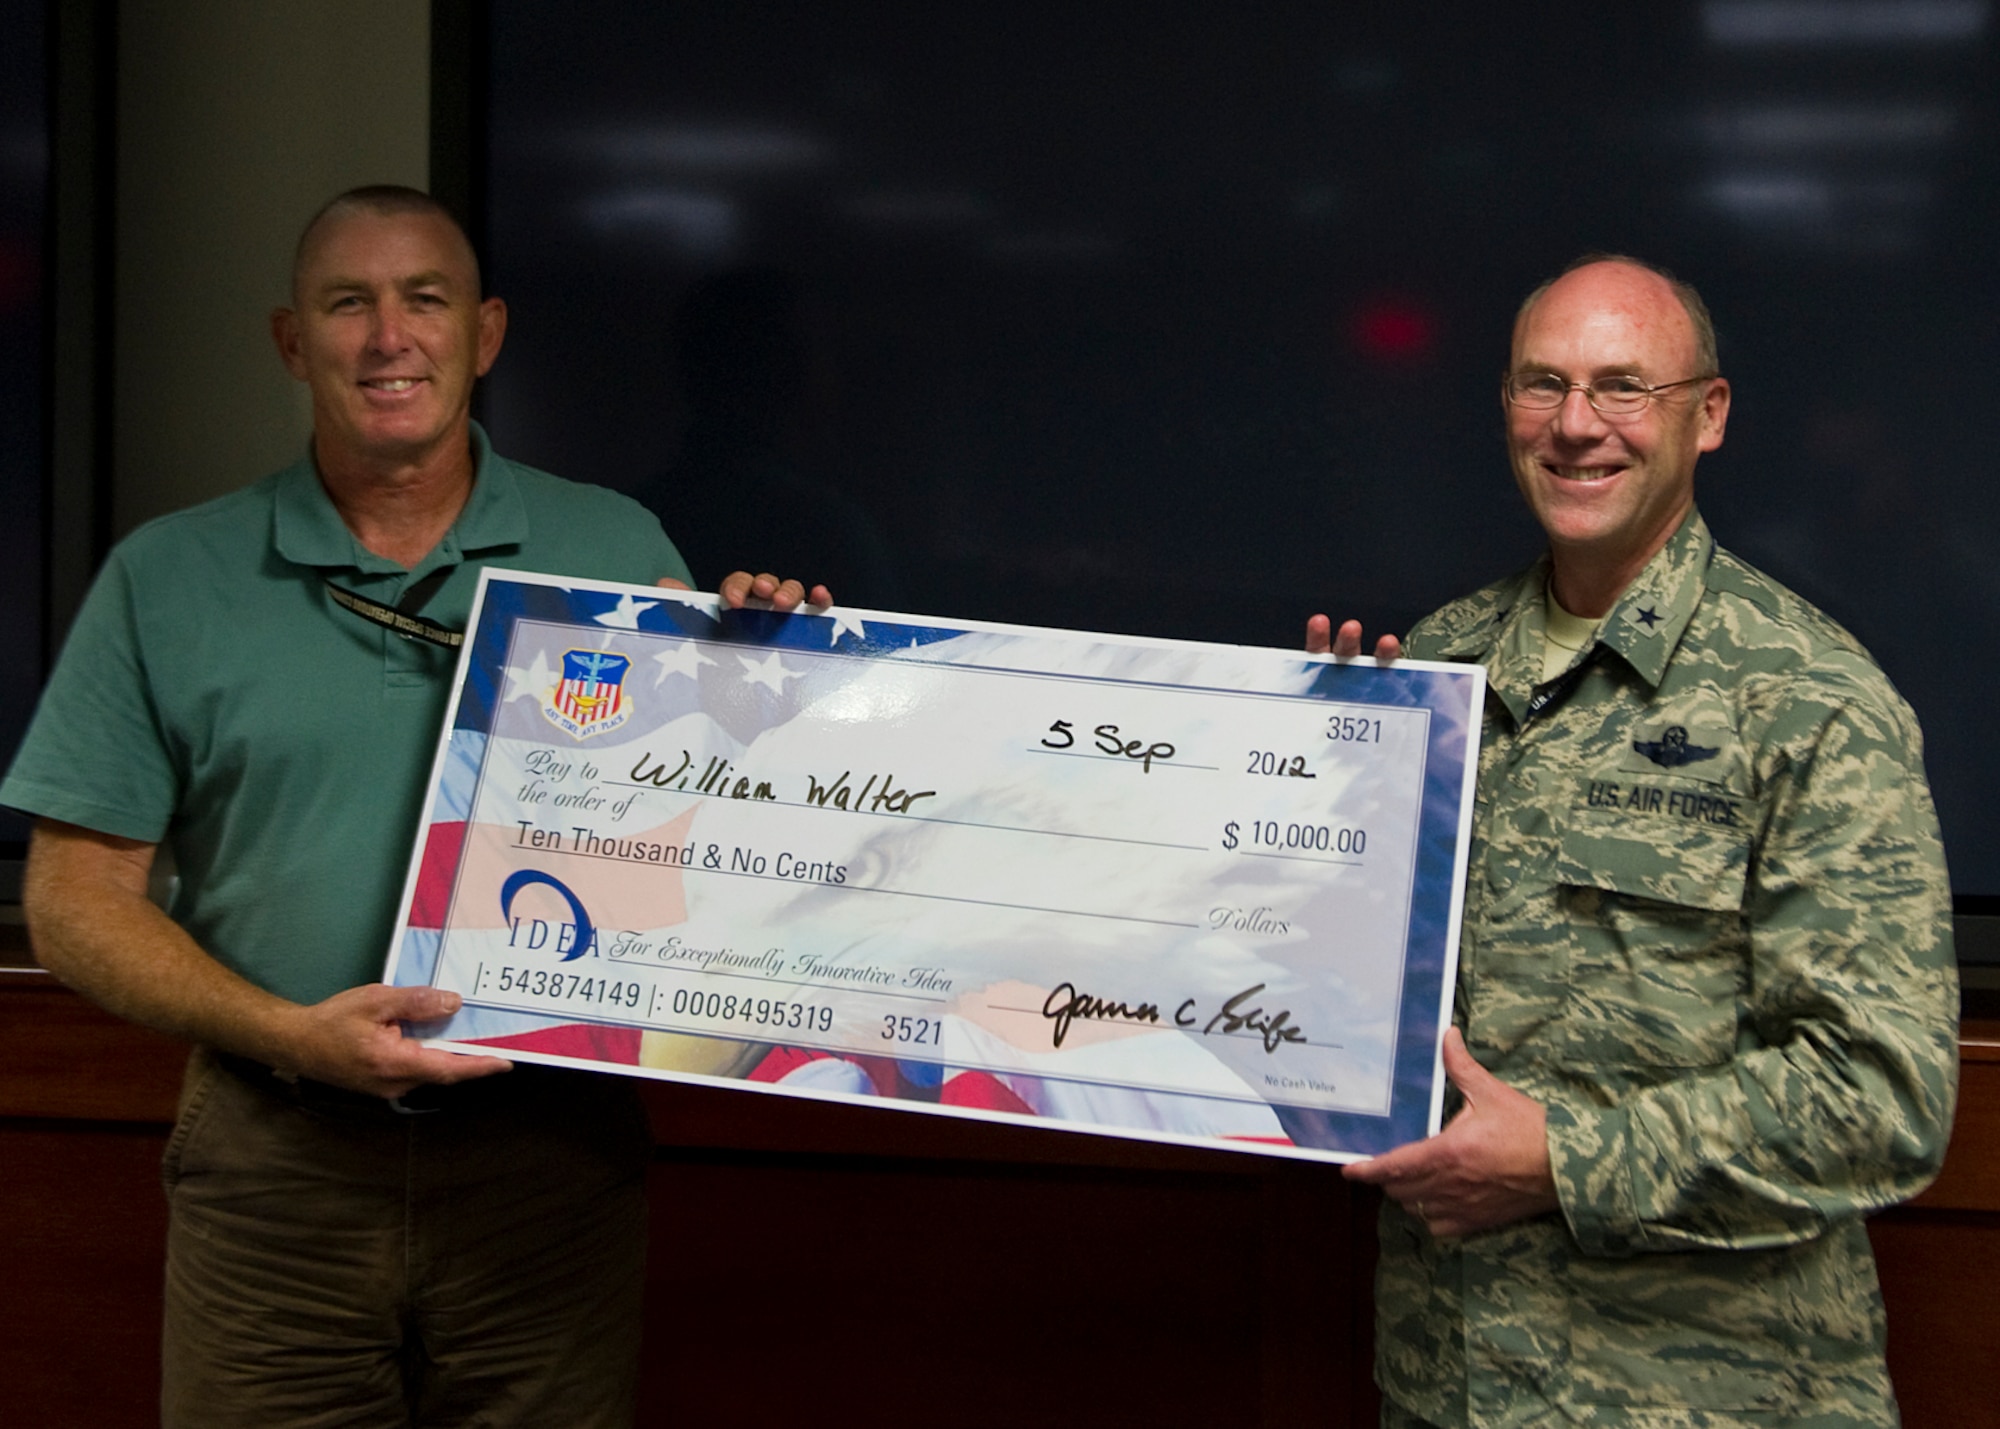 U.S. Air Force Brig. Gen. Michael Kingsley, Air Force Special Operations Command vice commander, poses with William Walter, AFSOC program analyst, during a ceremony held at the AFSOC headquarters building on Hurlburt Field, Fla., Sept. 5, 2012. Walter submitted a proposal to the IDEA program and was rewarded with a $10,000 check. (U.S. Air Force photo/Airman 1st Class Christopher Williams)